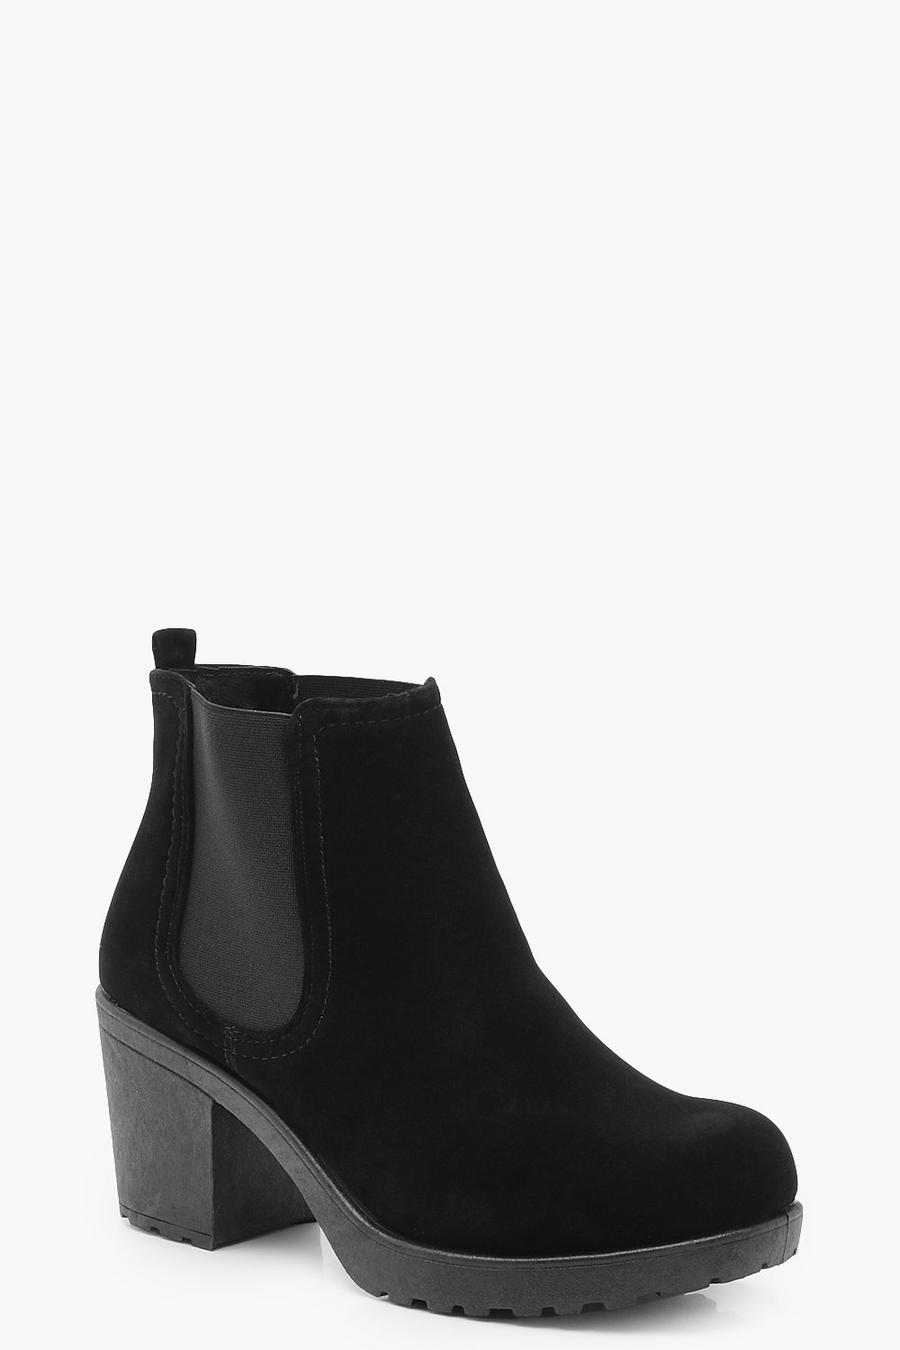 Black Wide Fit Suedette Cleated Heel Chelsea Boots image number 1